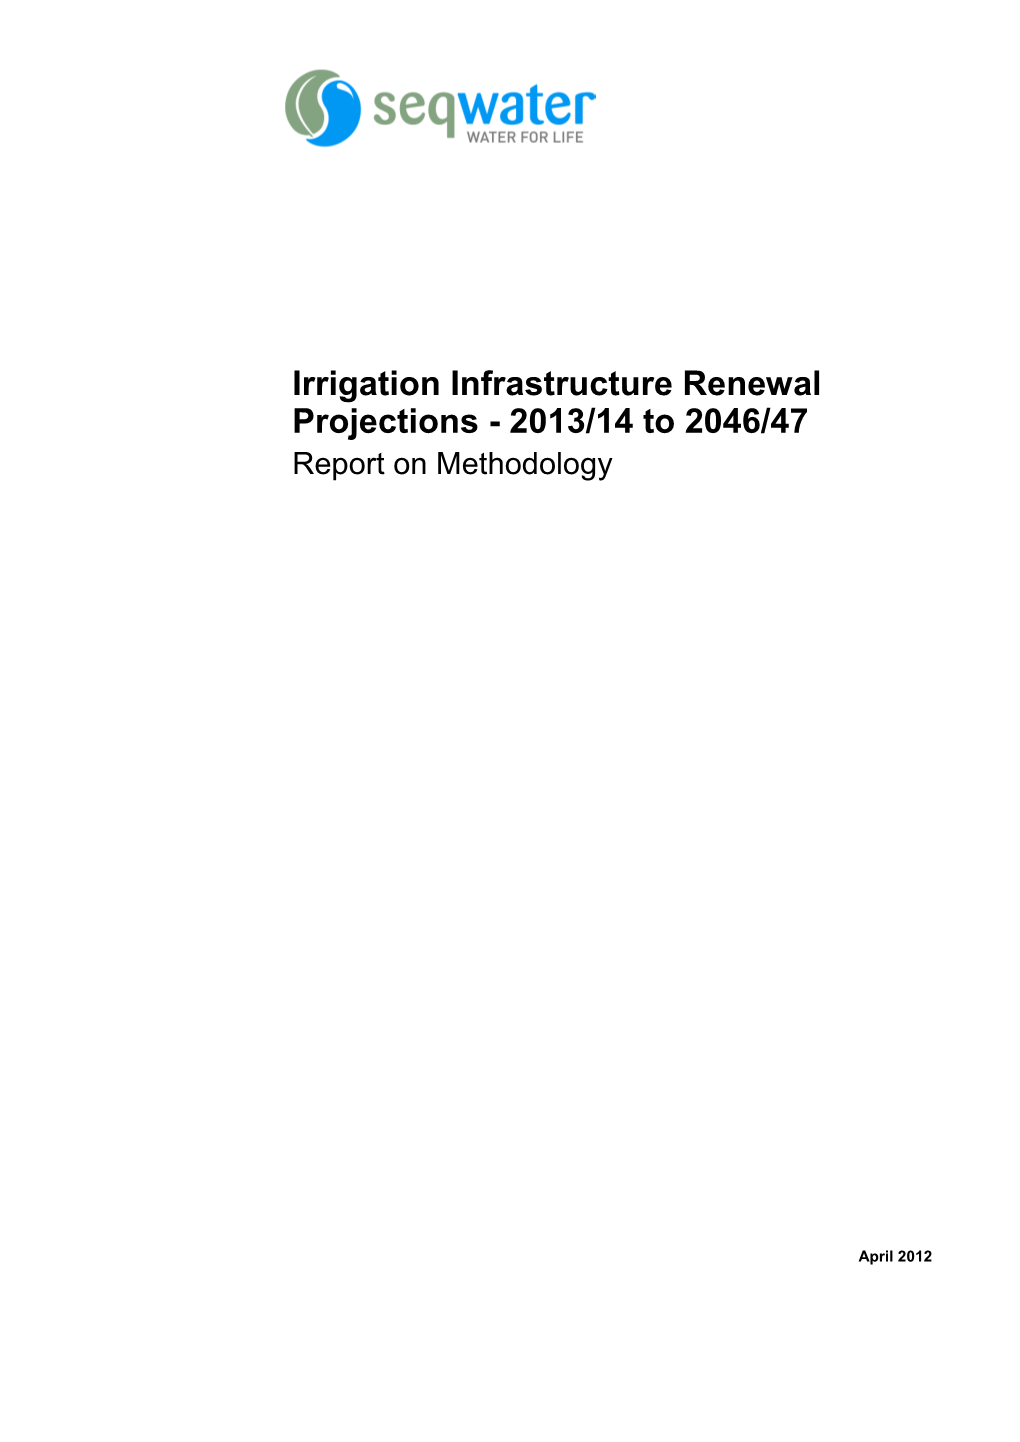 Irrigation Infrastructure Renewal Projections - 2013/14 to 2046/47 Report on Methodology